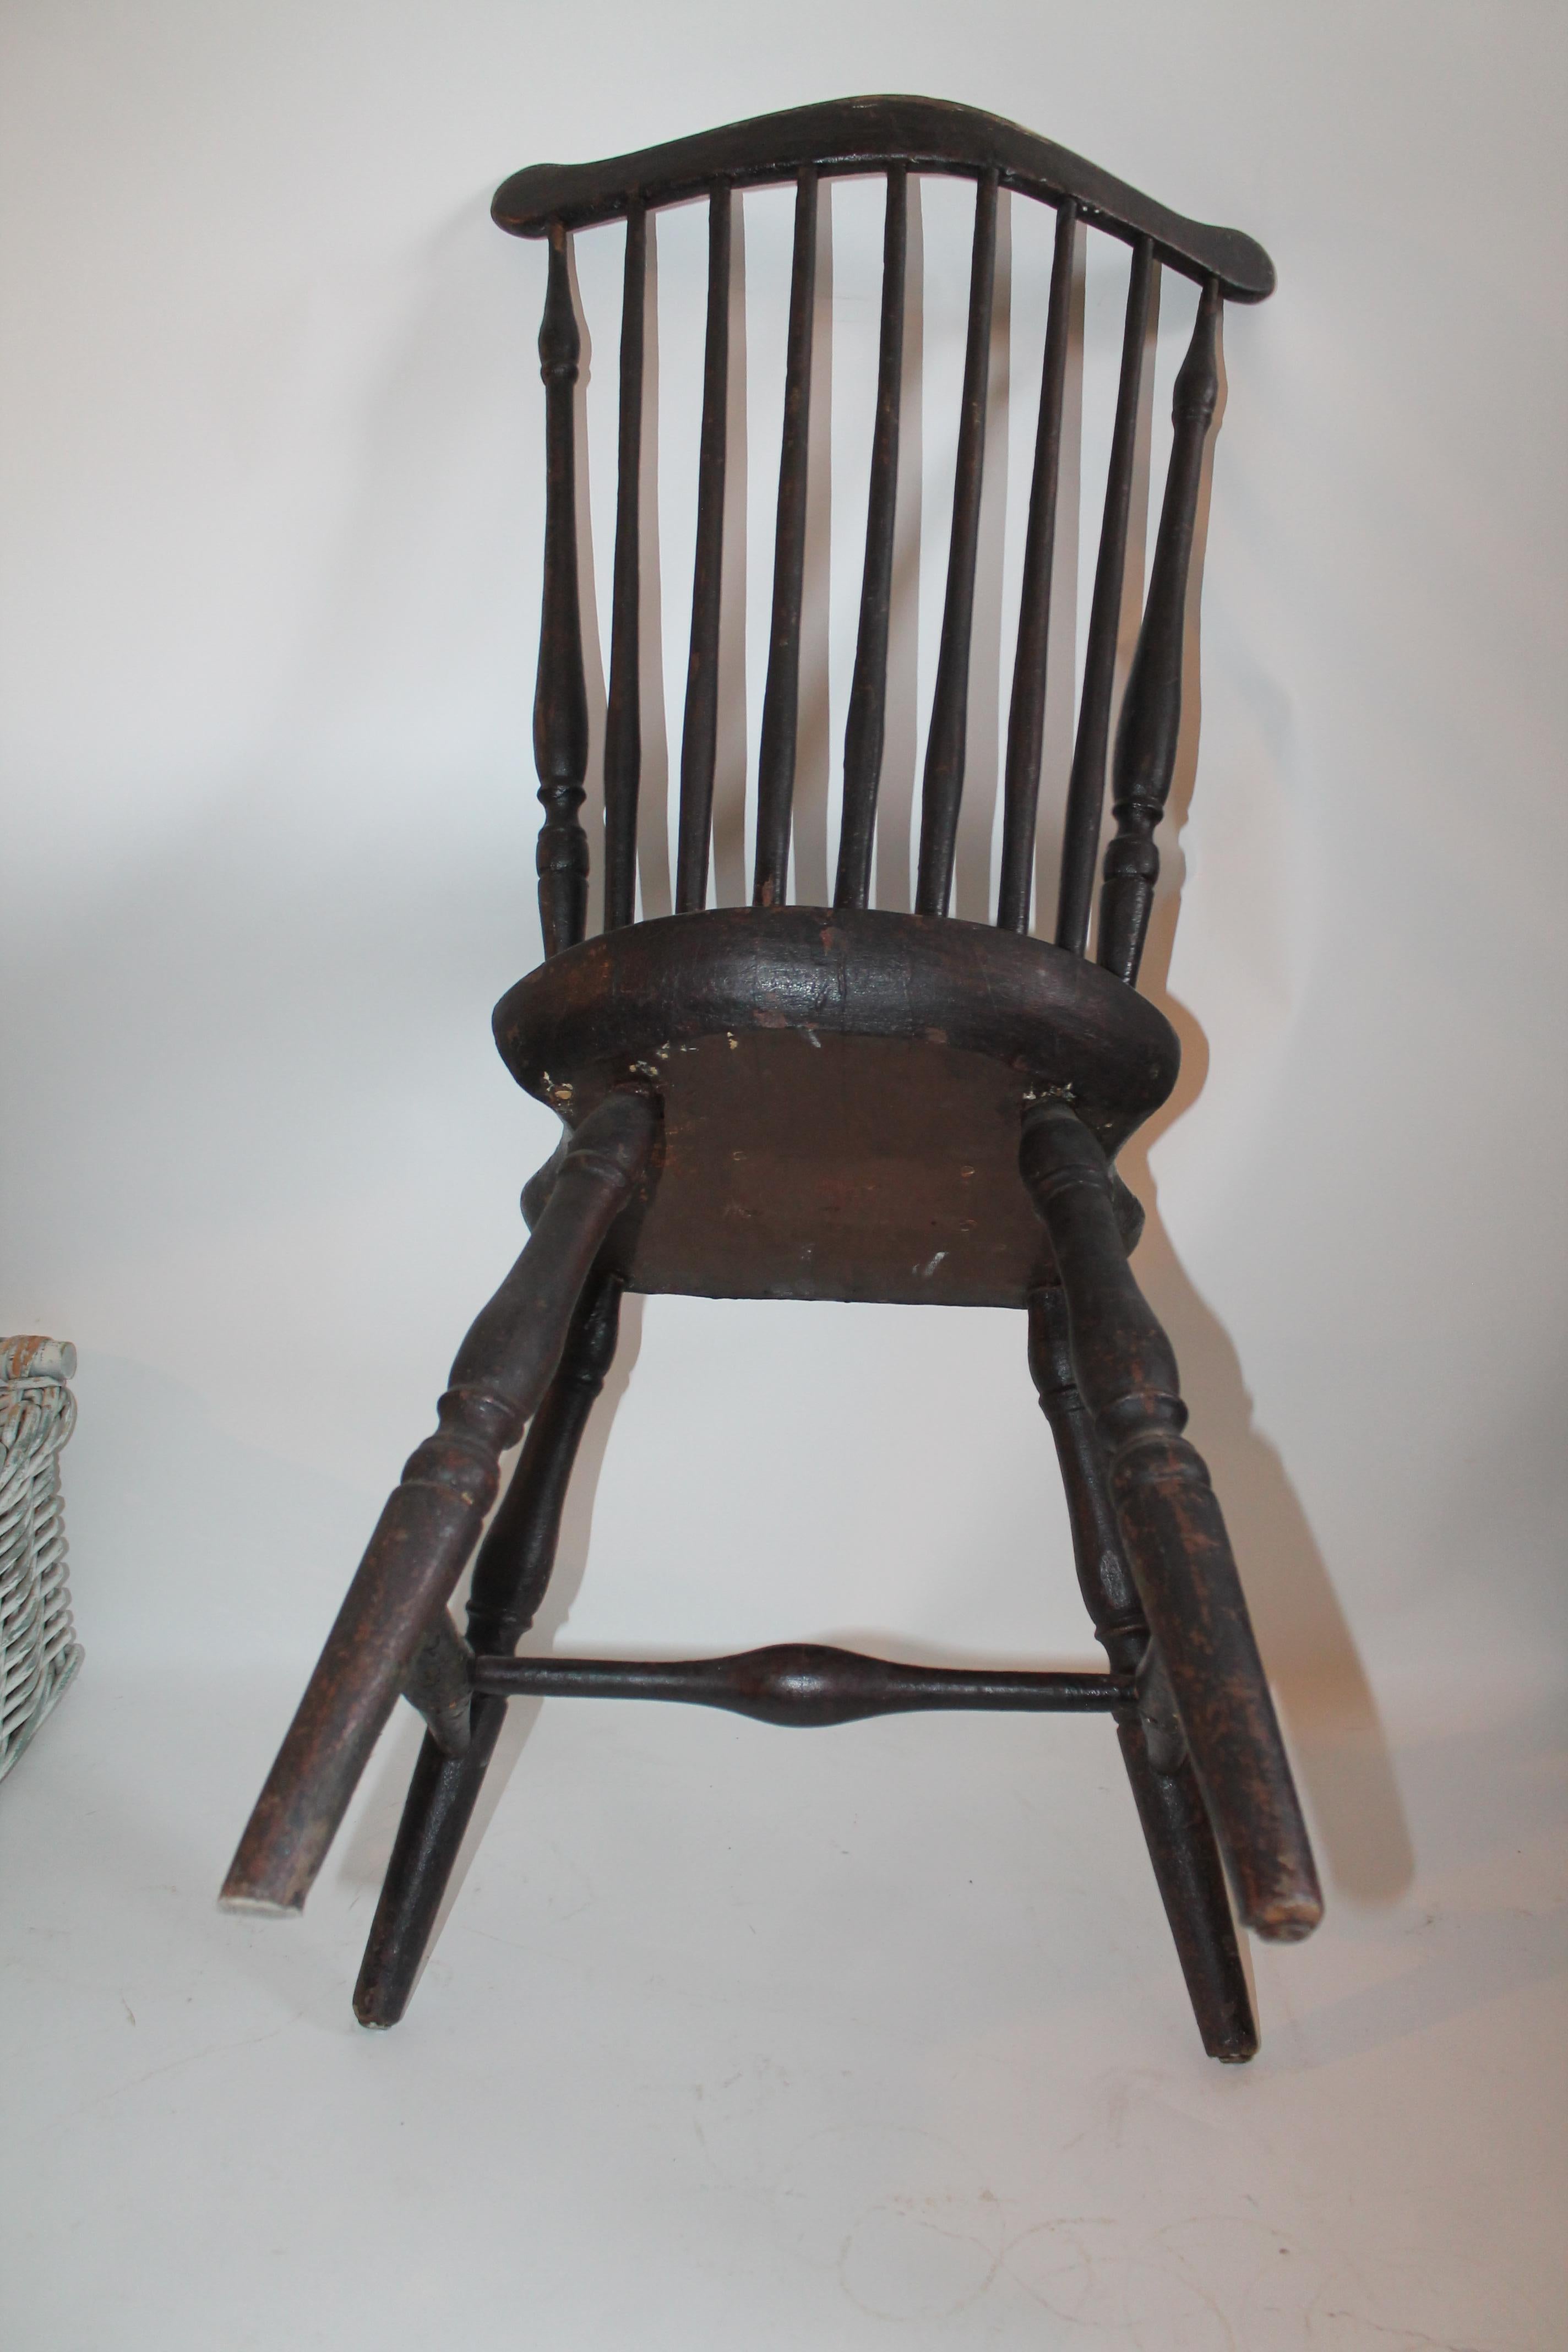 Hand-Painted 18th Century Connecticut River Valley Windsor Chair